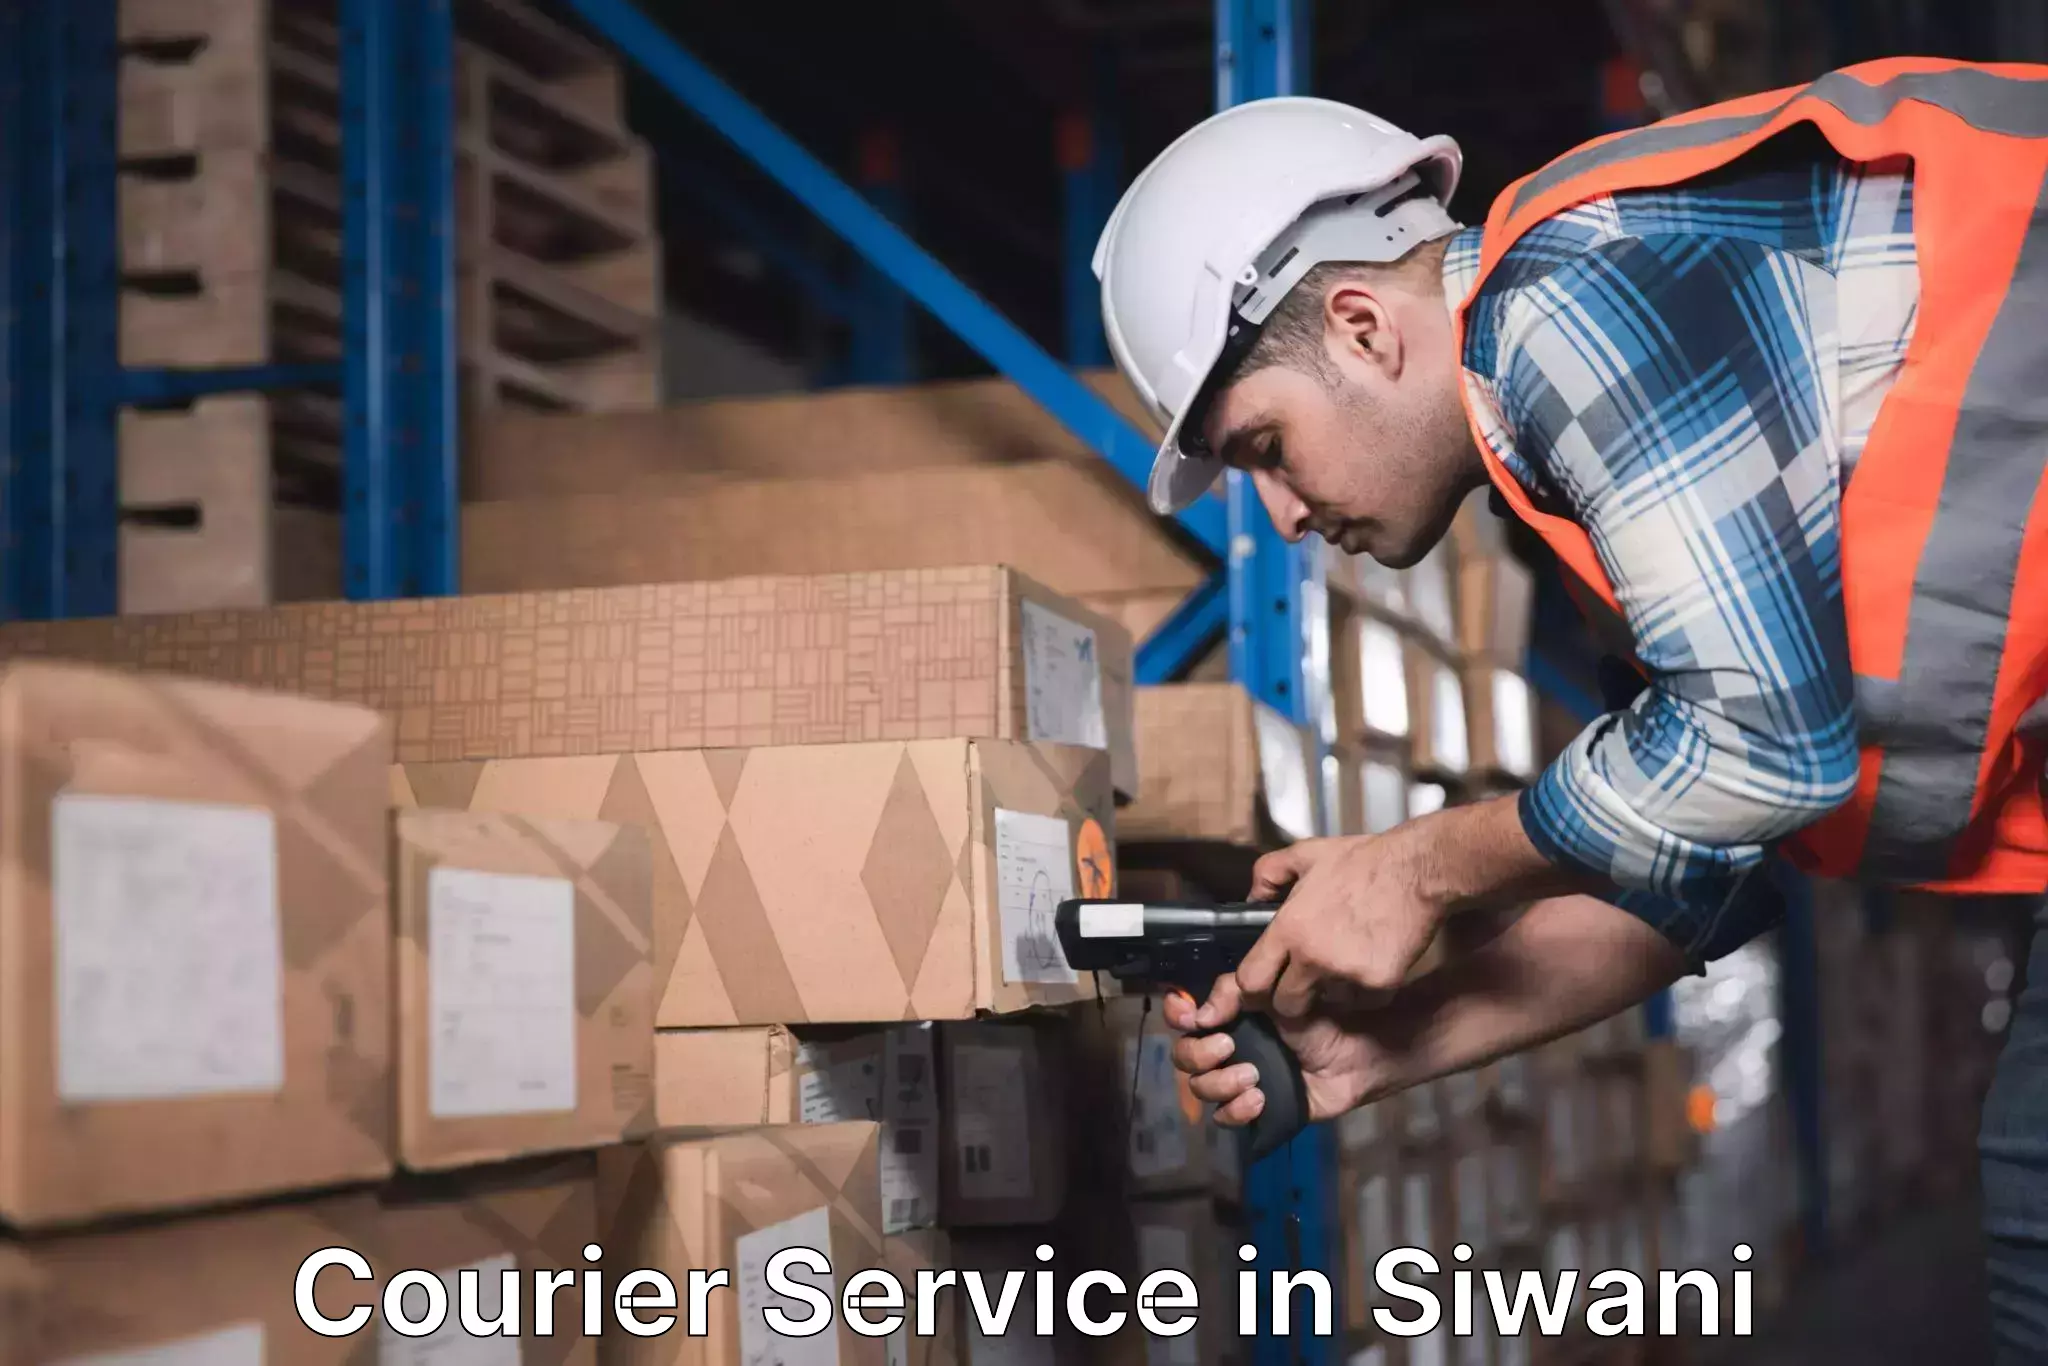 Express delivery capabilities in Siwani